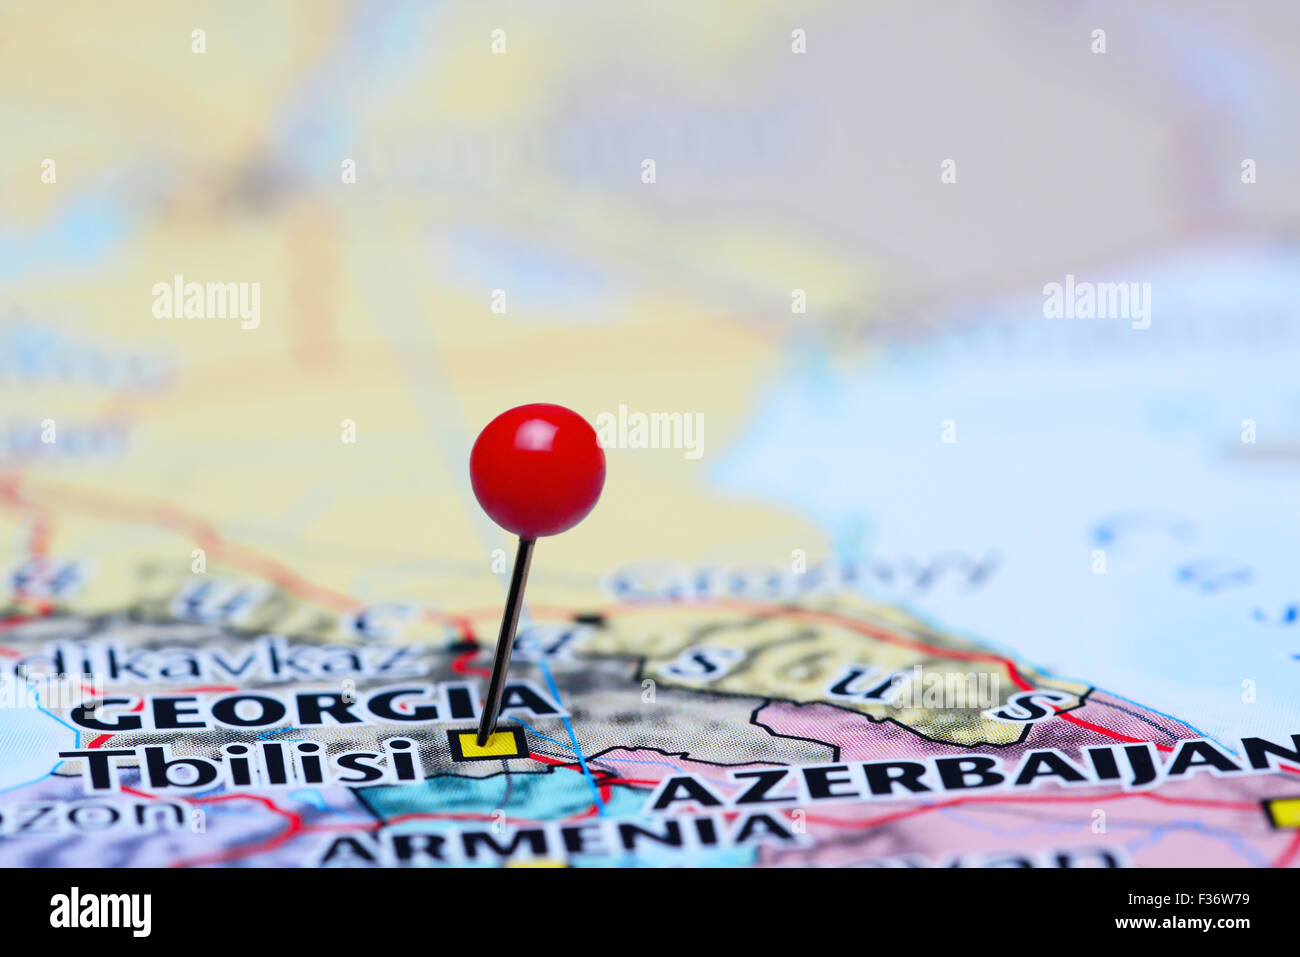 Tbilisi pinned on a map of Asia Stock Photo